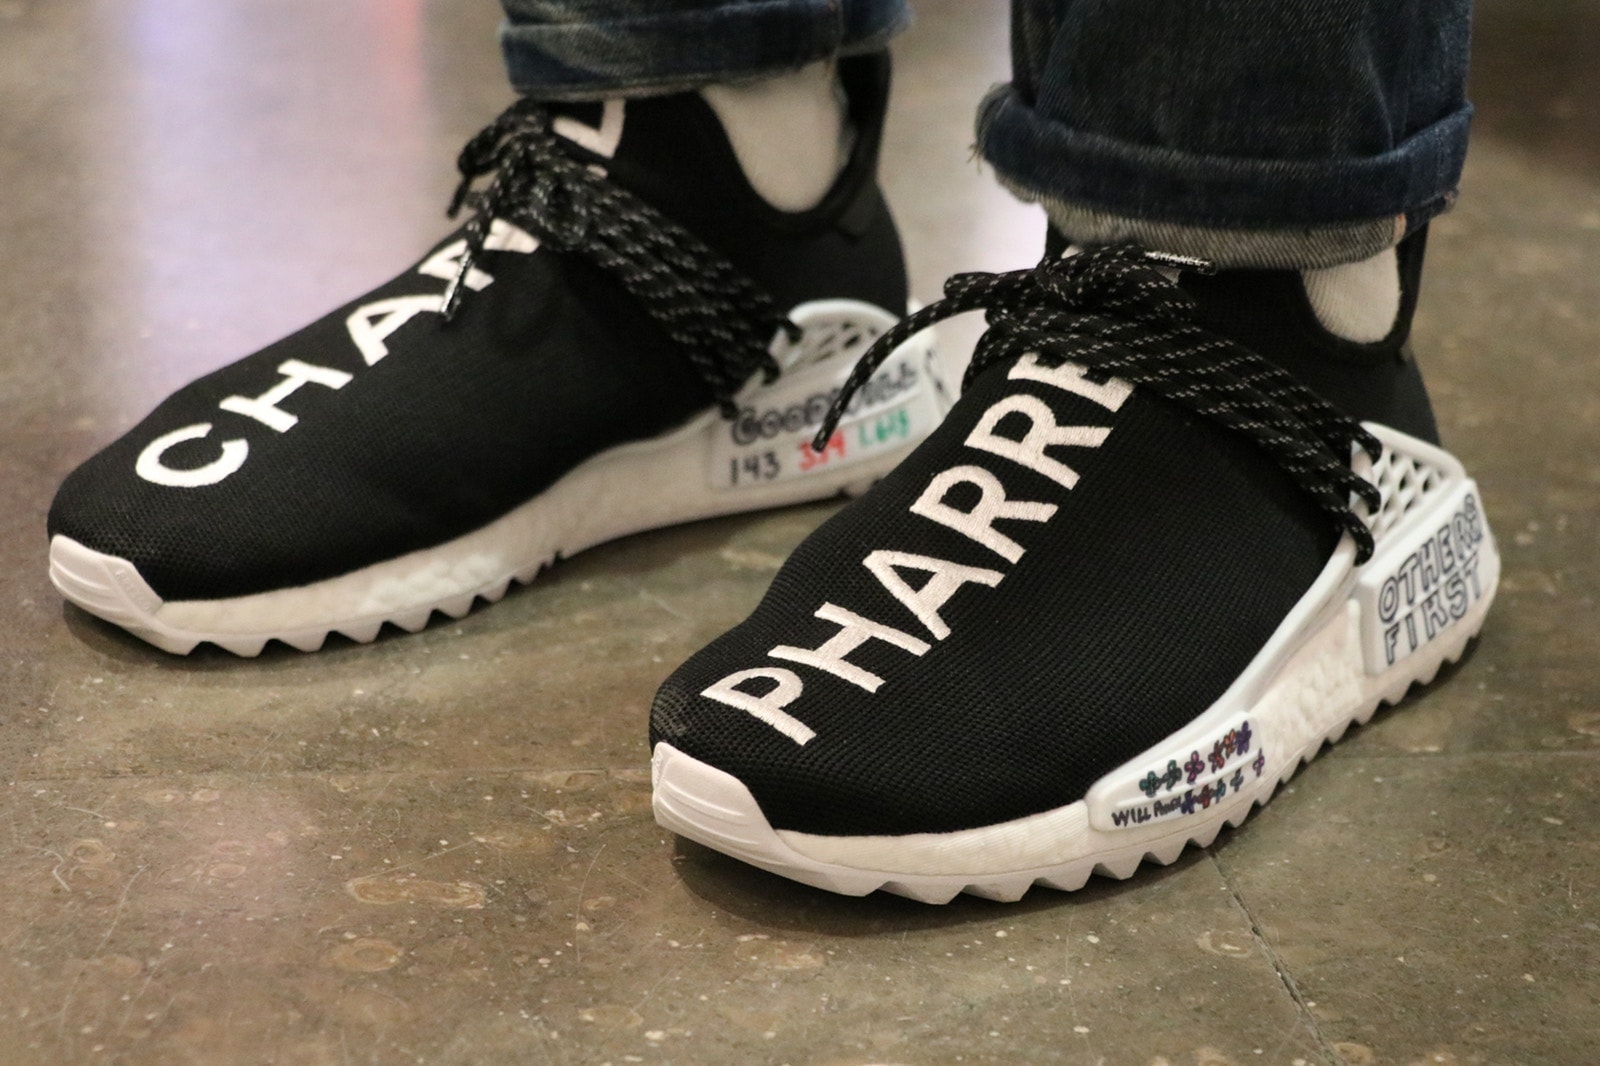 Chanel x adidas Originals Pharrell Williams NMD Footwear colette Exclusive Collection Collaboration